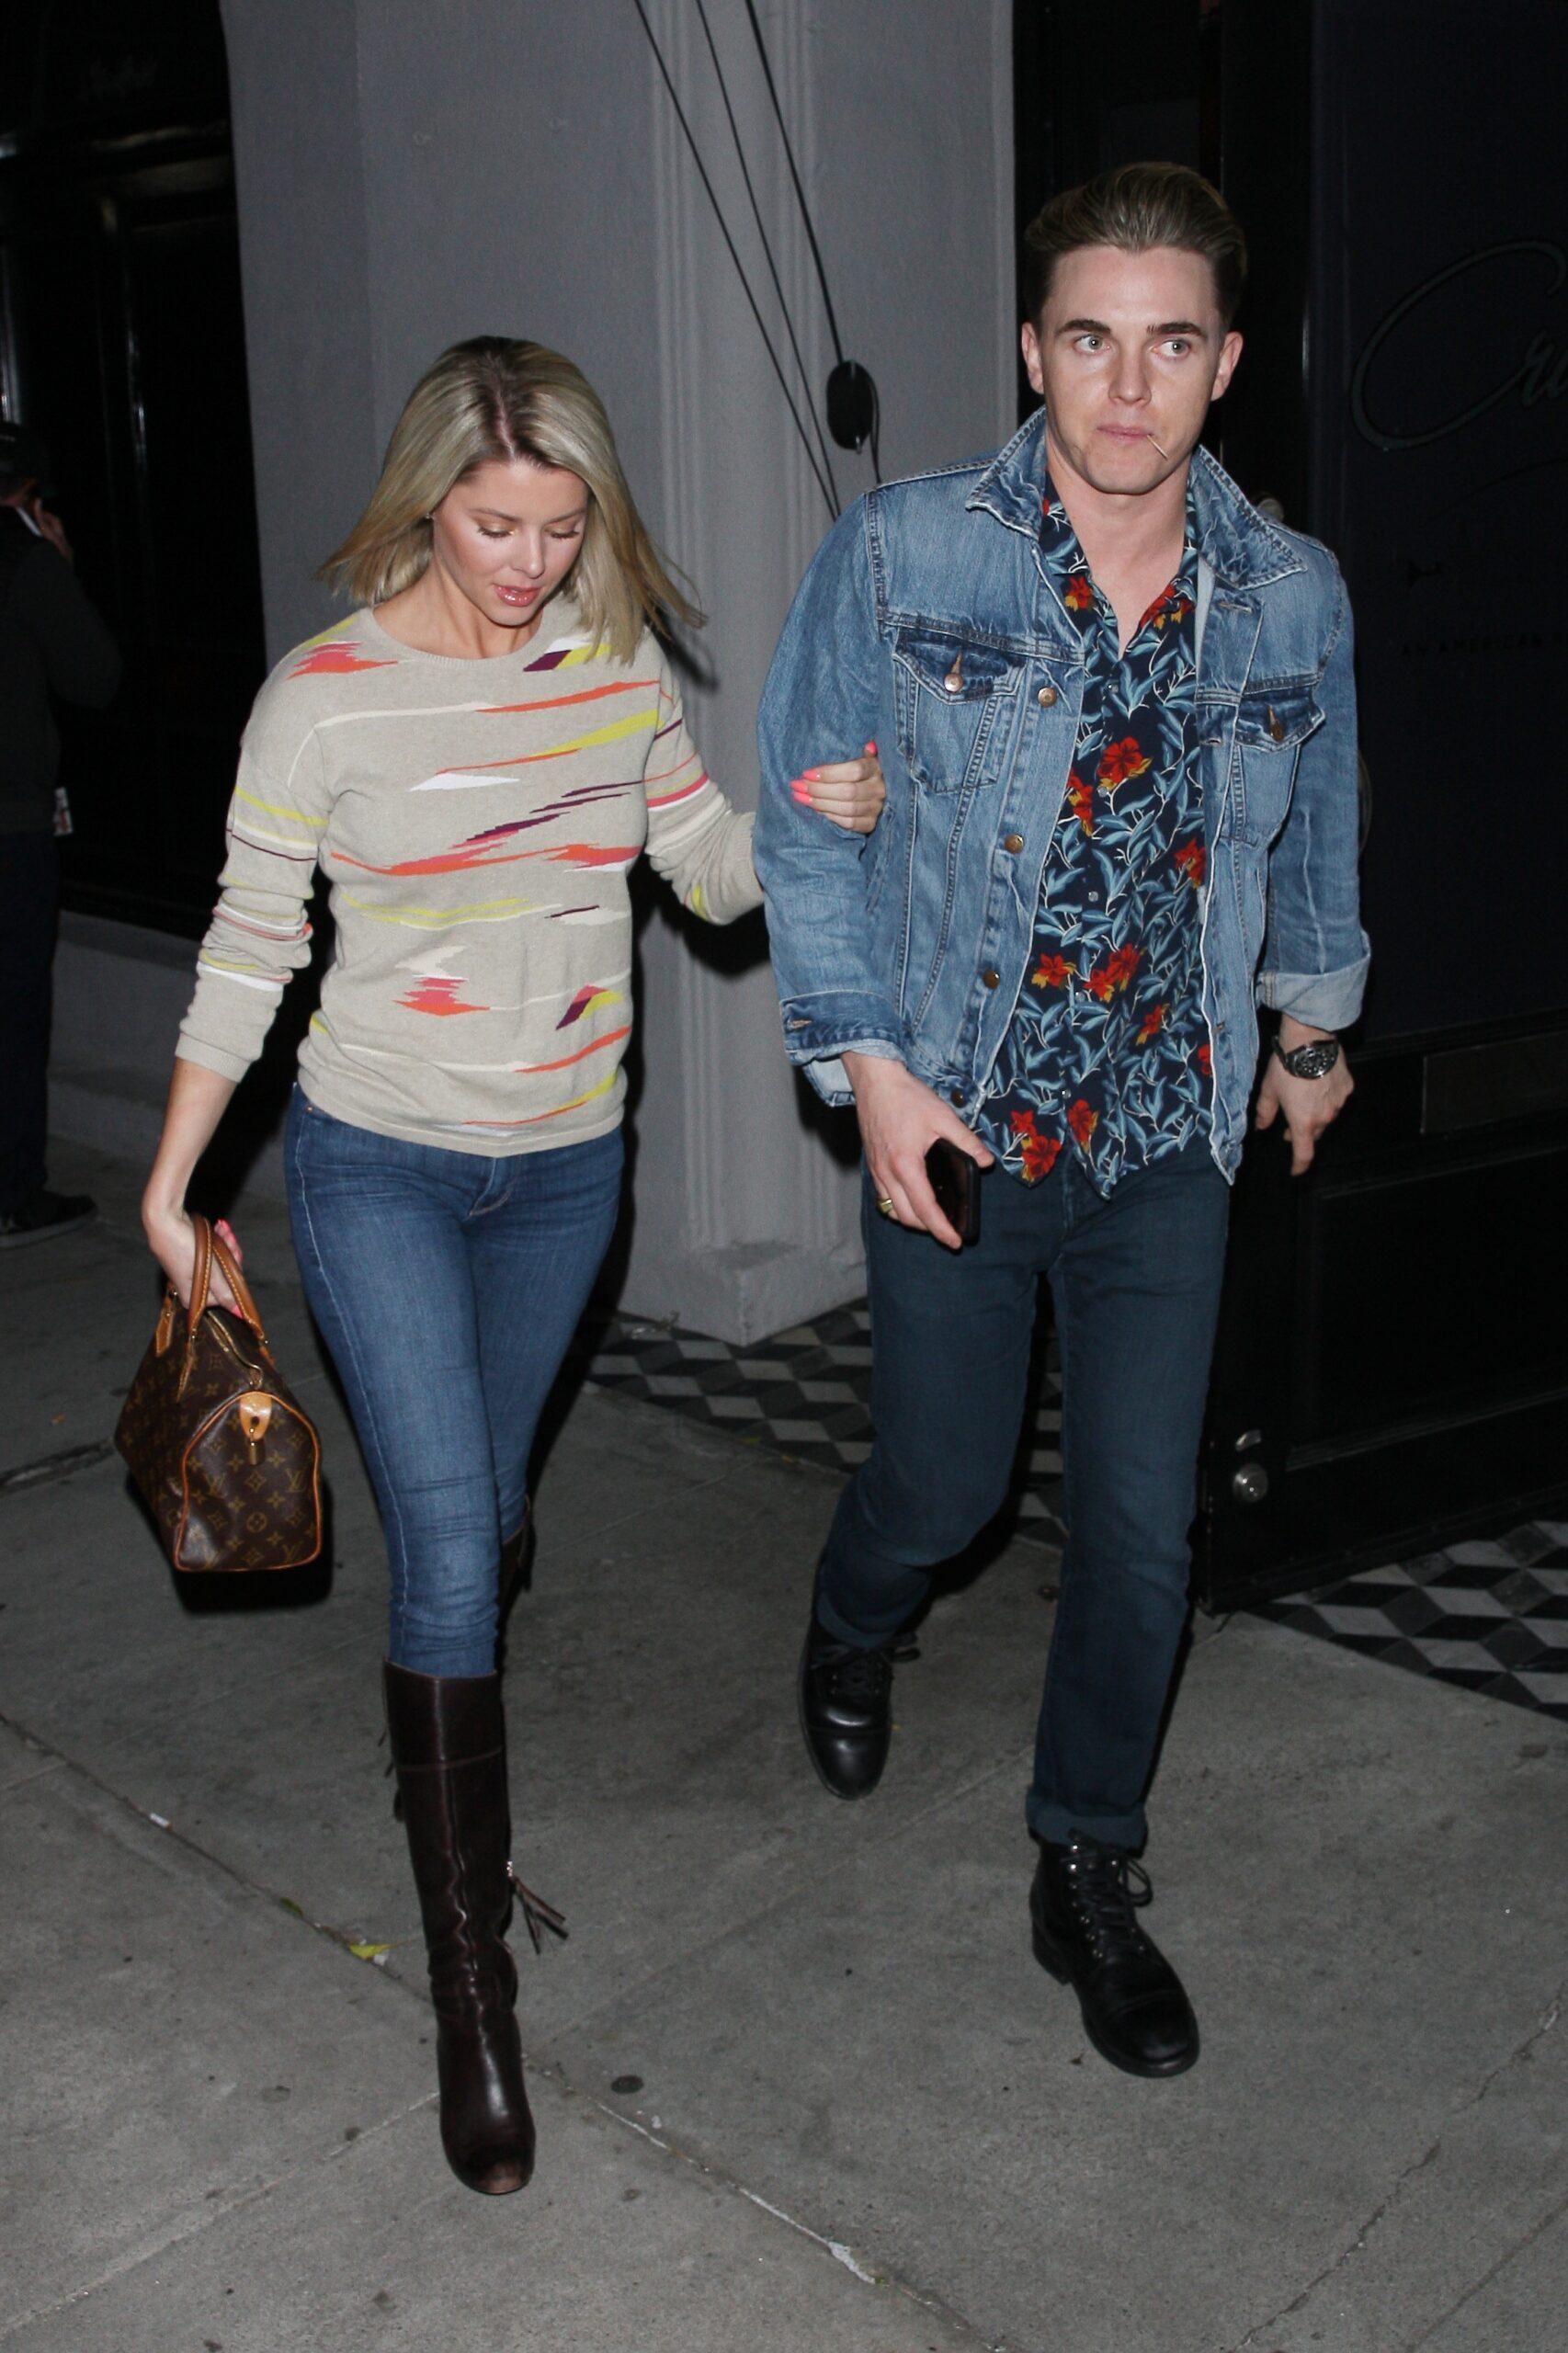 Singer Jesse McCartney and his girlfriend are spotted dining at Craig apos s restaurant